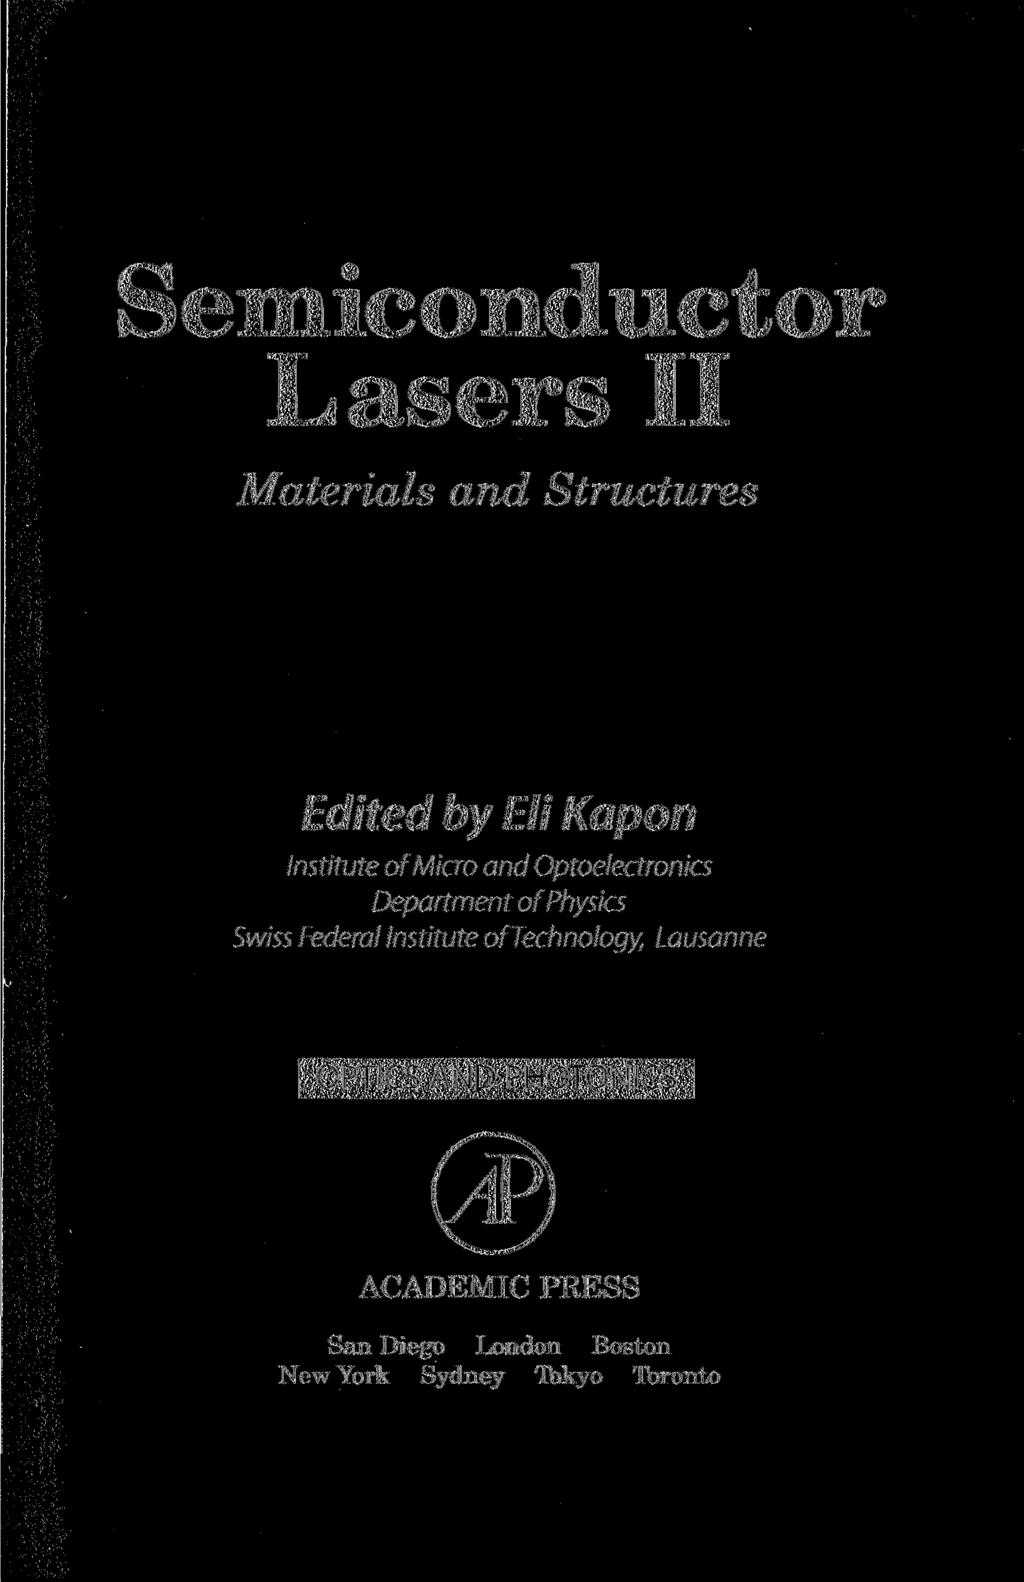 Semiconductor Lasers II Materials and Structures Edited by Eli Kapon Institute of Micro and Optoelectronics Department of Physics